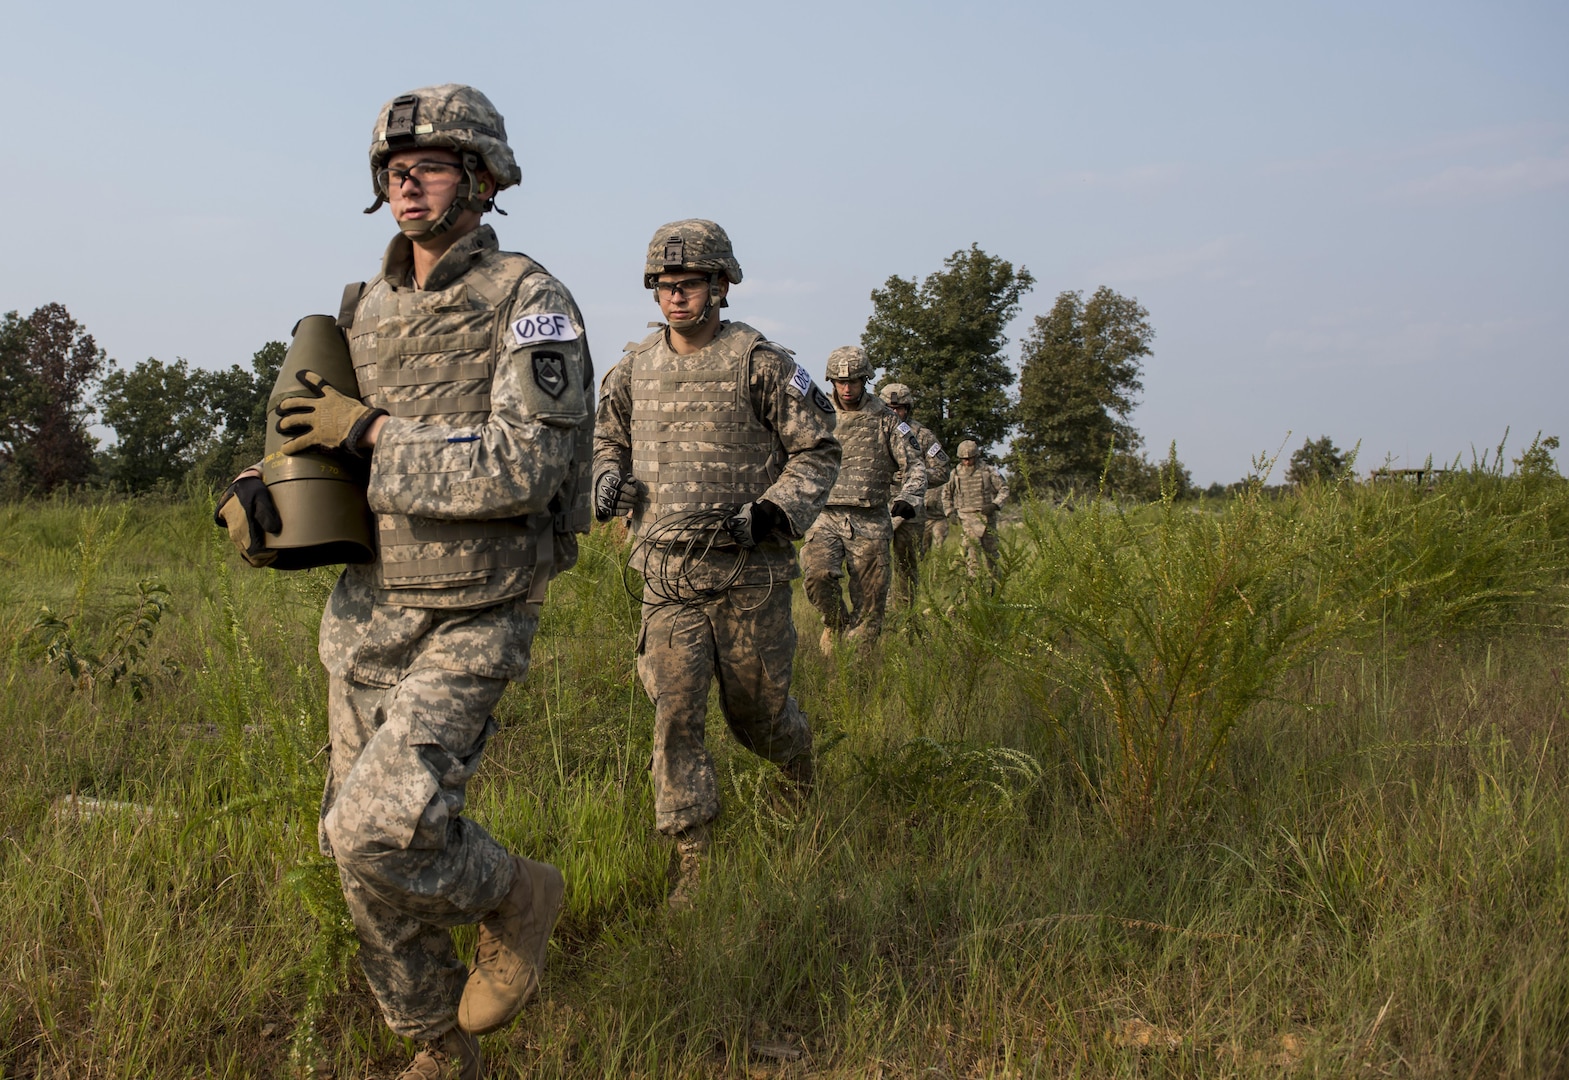 National Guard combat engineers with the 119th Engineer Company (Sapper), from West Virginia, carry a 15-pound shape charge onto a demolition range during Sapper Stakes 2015 competition at Fort Chaffe, Arkansas, Aug. 31, 2015. Combat engineers use demolition in mobility and counter-mobility to both allow movement to allies and impede movement for enemy forces. The competition is designed to build teamwork, enhance combat engineering skills and promote leadership among the units. 